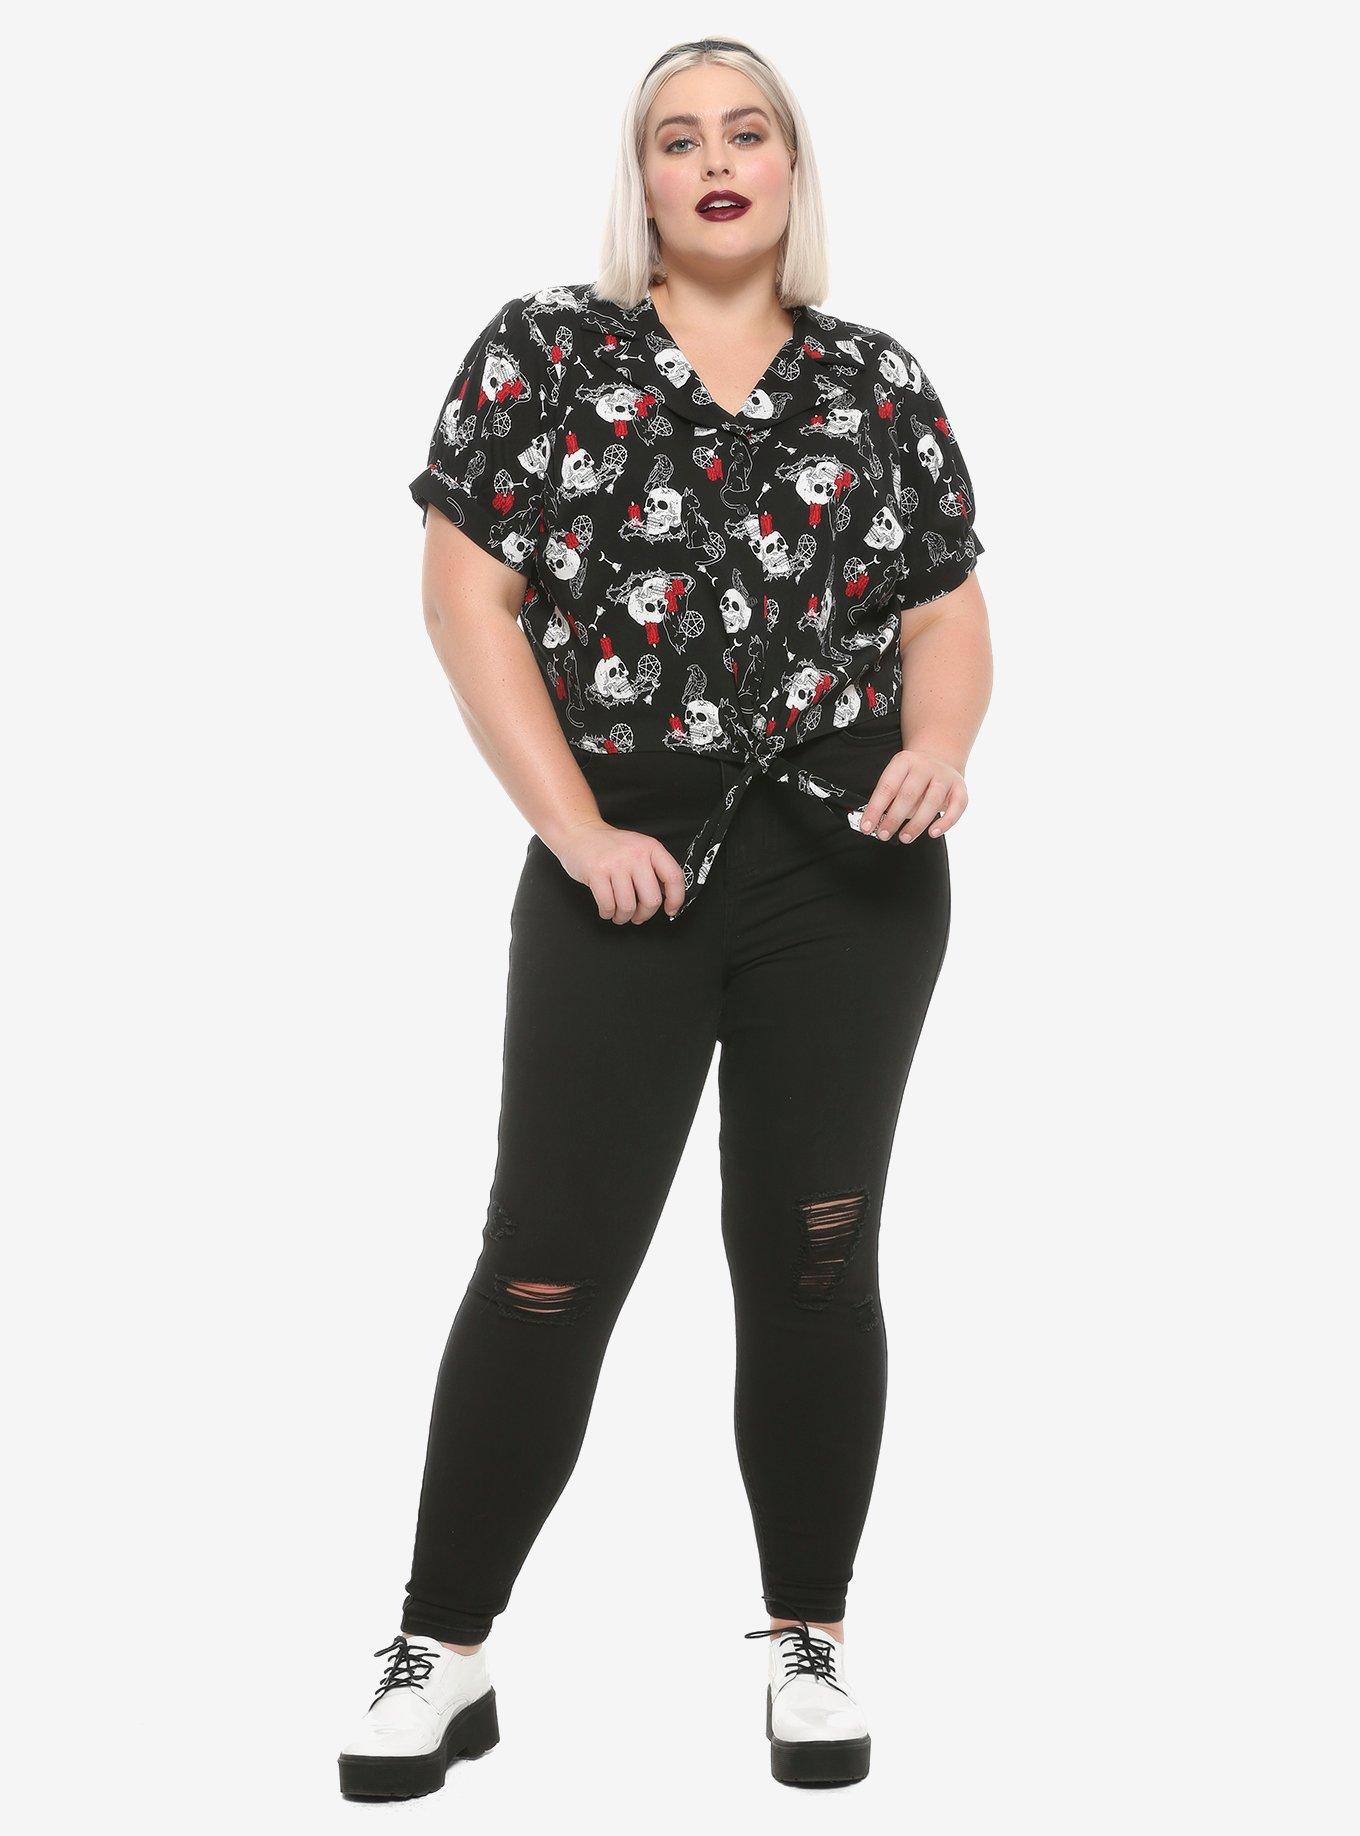 Chilling Adventures Of Sabrina Salem Tie-Front Girls Woven Button-Up Plus Size, MULTI, alternate